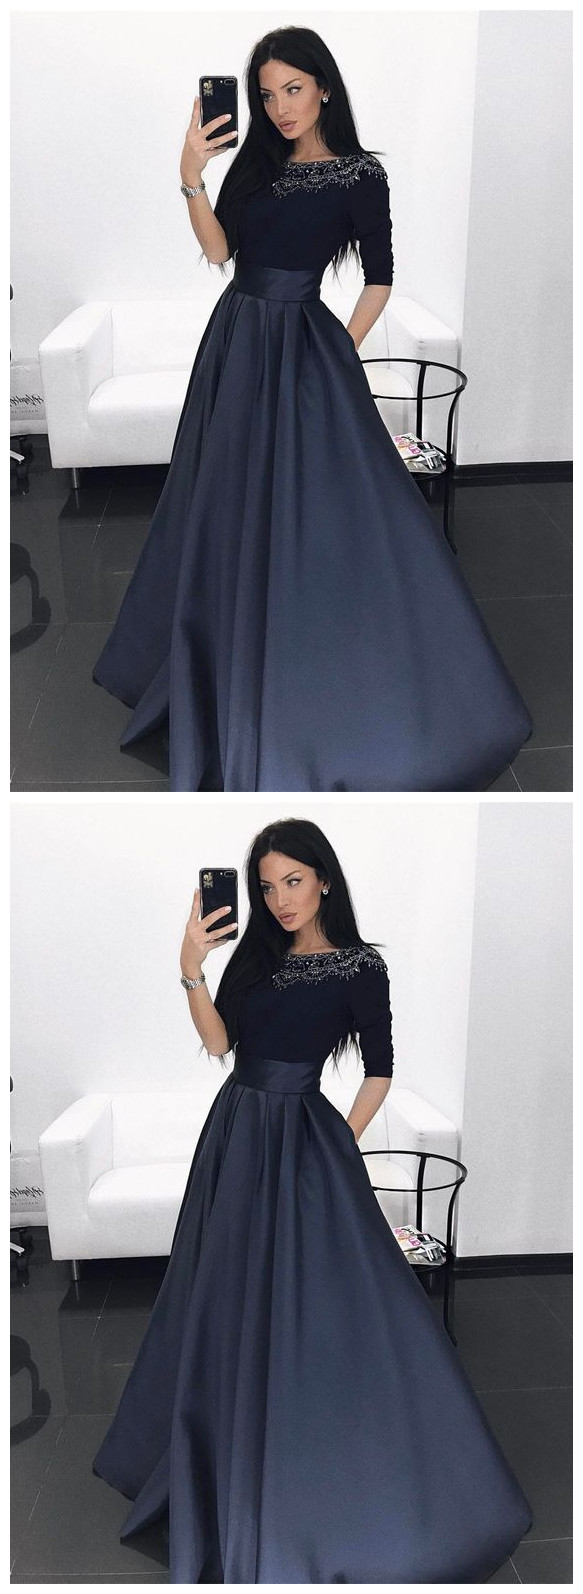 Prom Dress, Elegant Navy Prom Party Dresses With Half Sleeves Beaded, Fashion Ball Gowns For Evening Party M3136